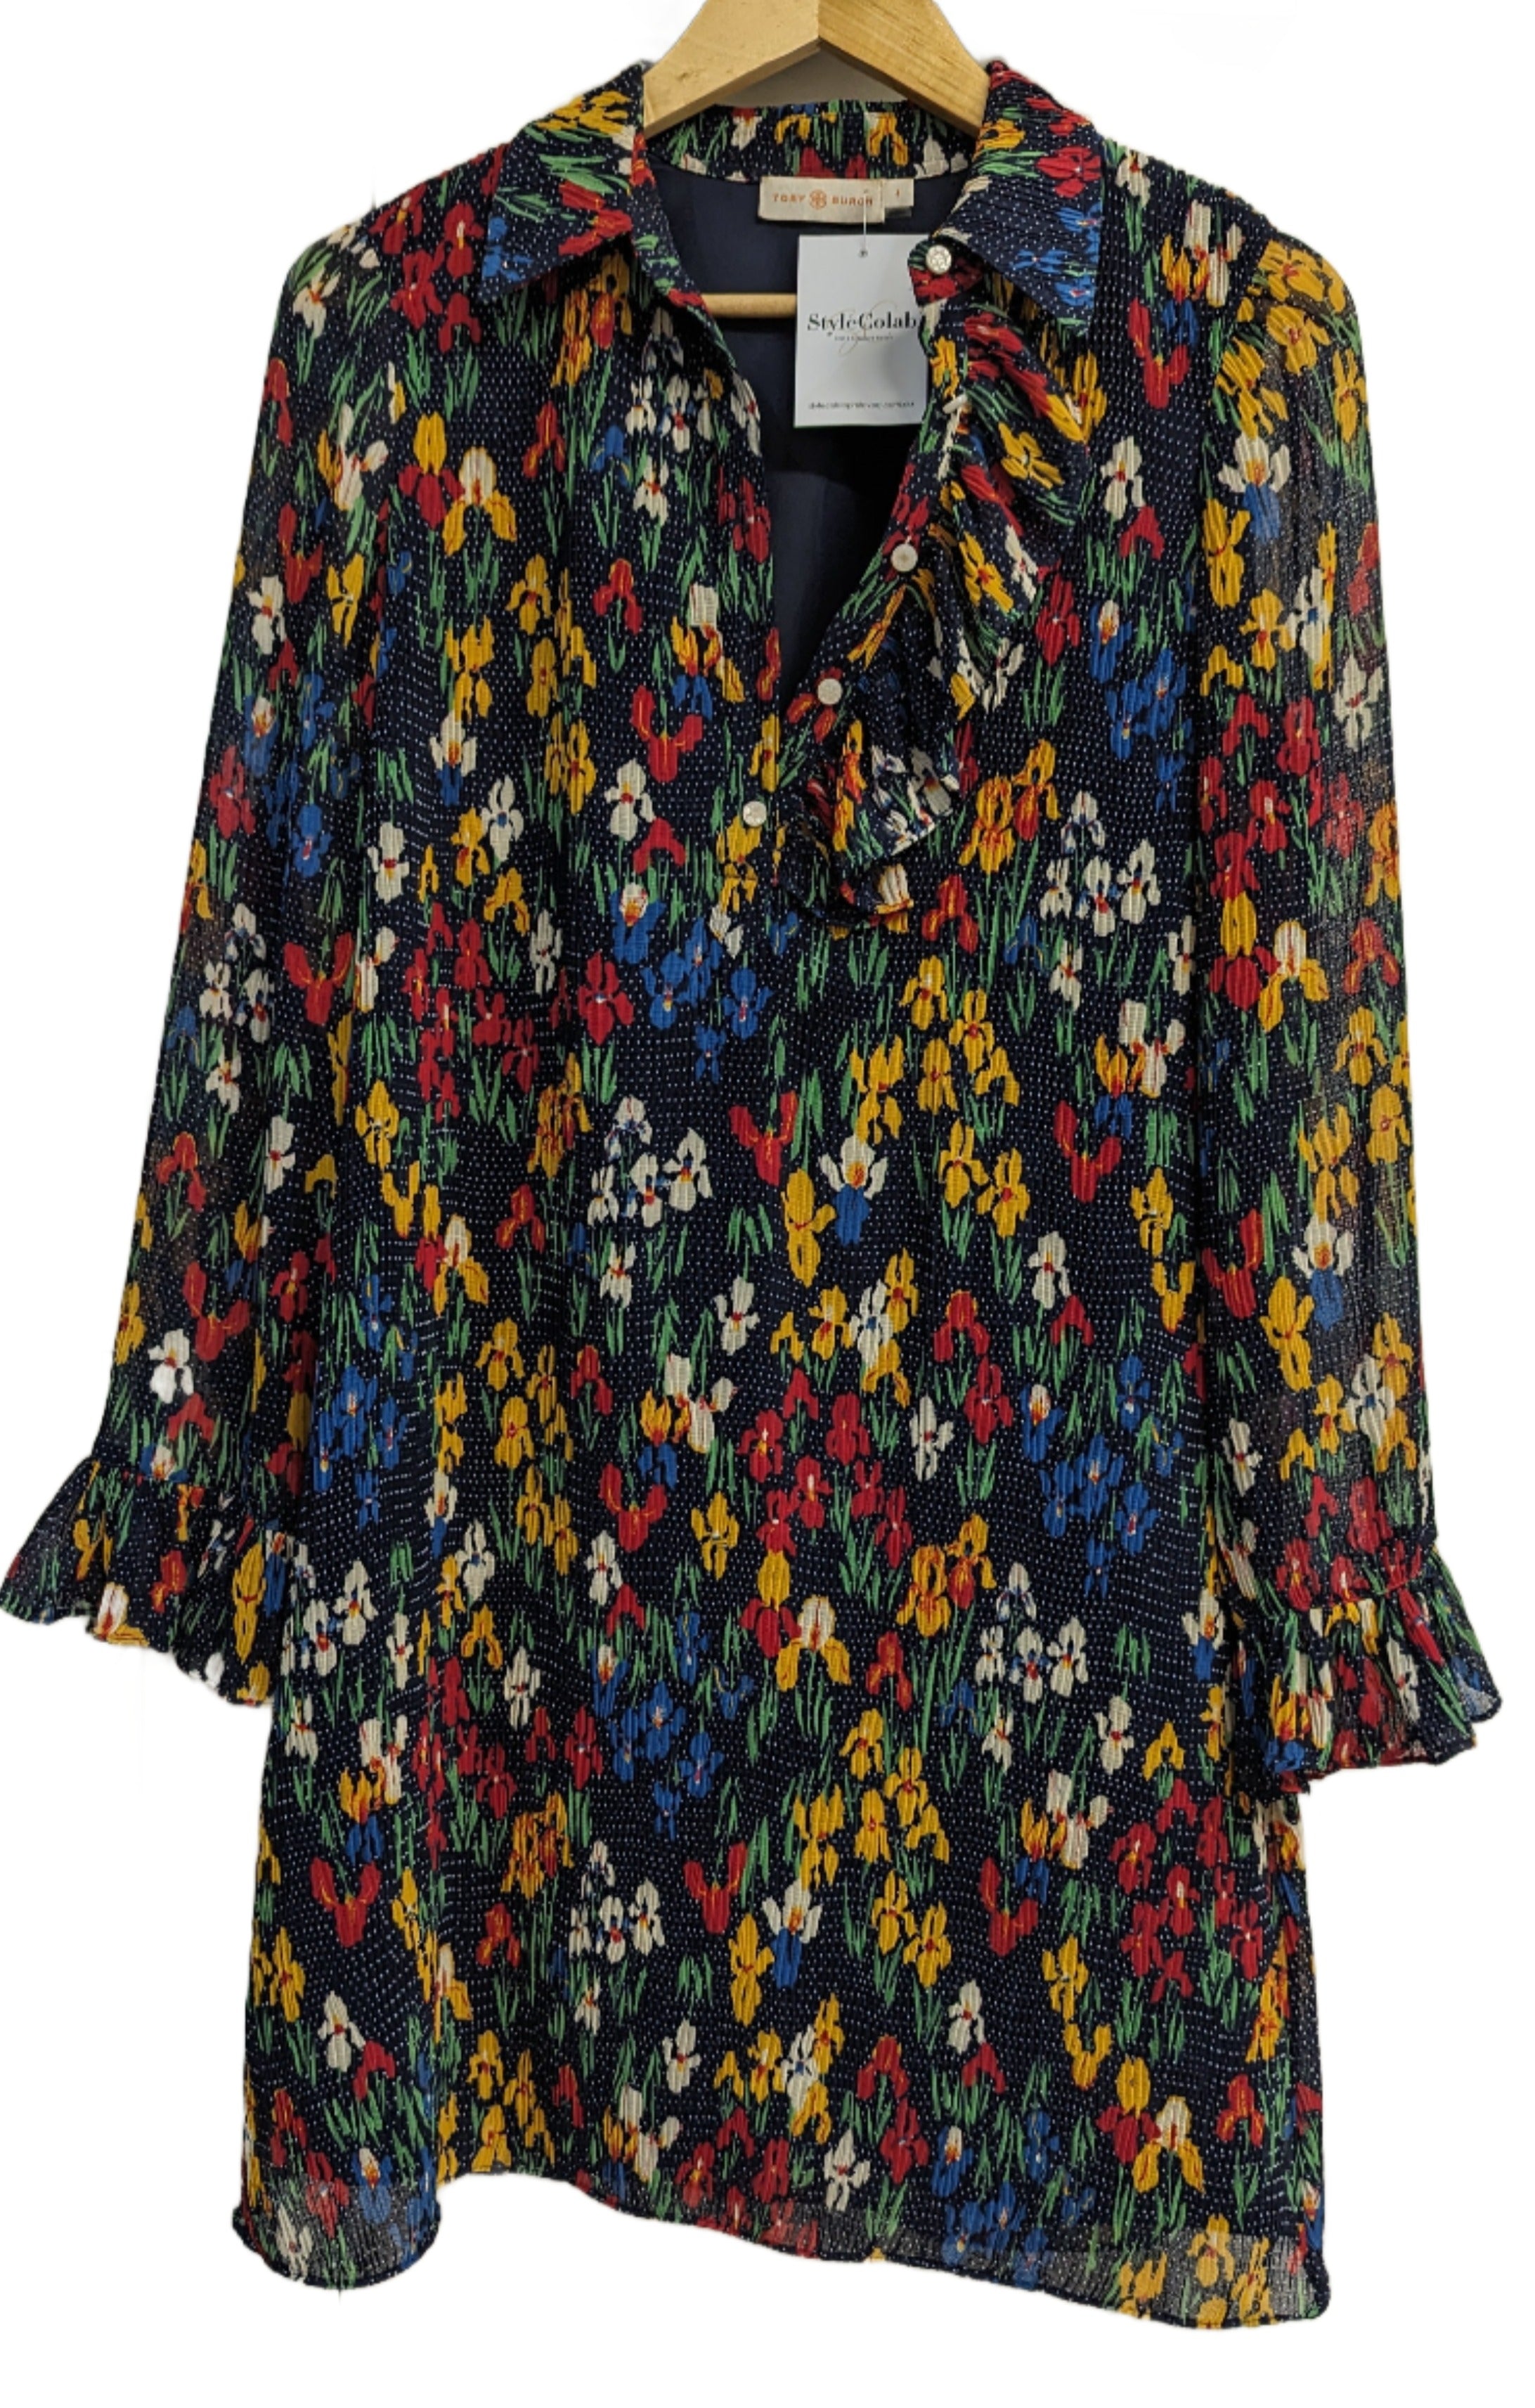 Tory Burch Multicoloured Floral Dress